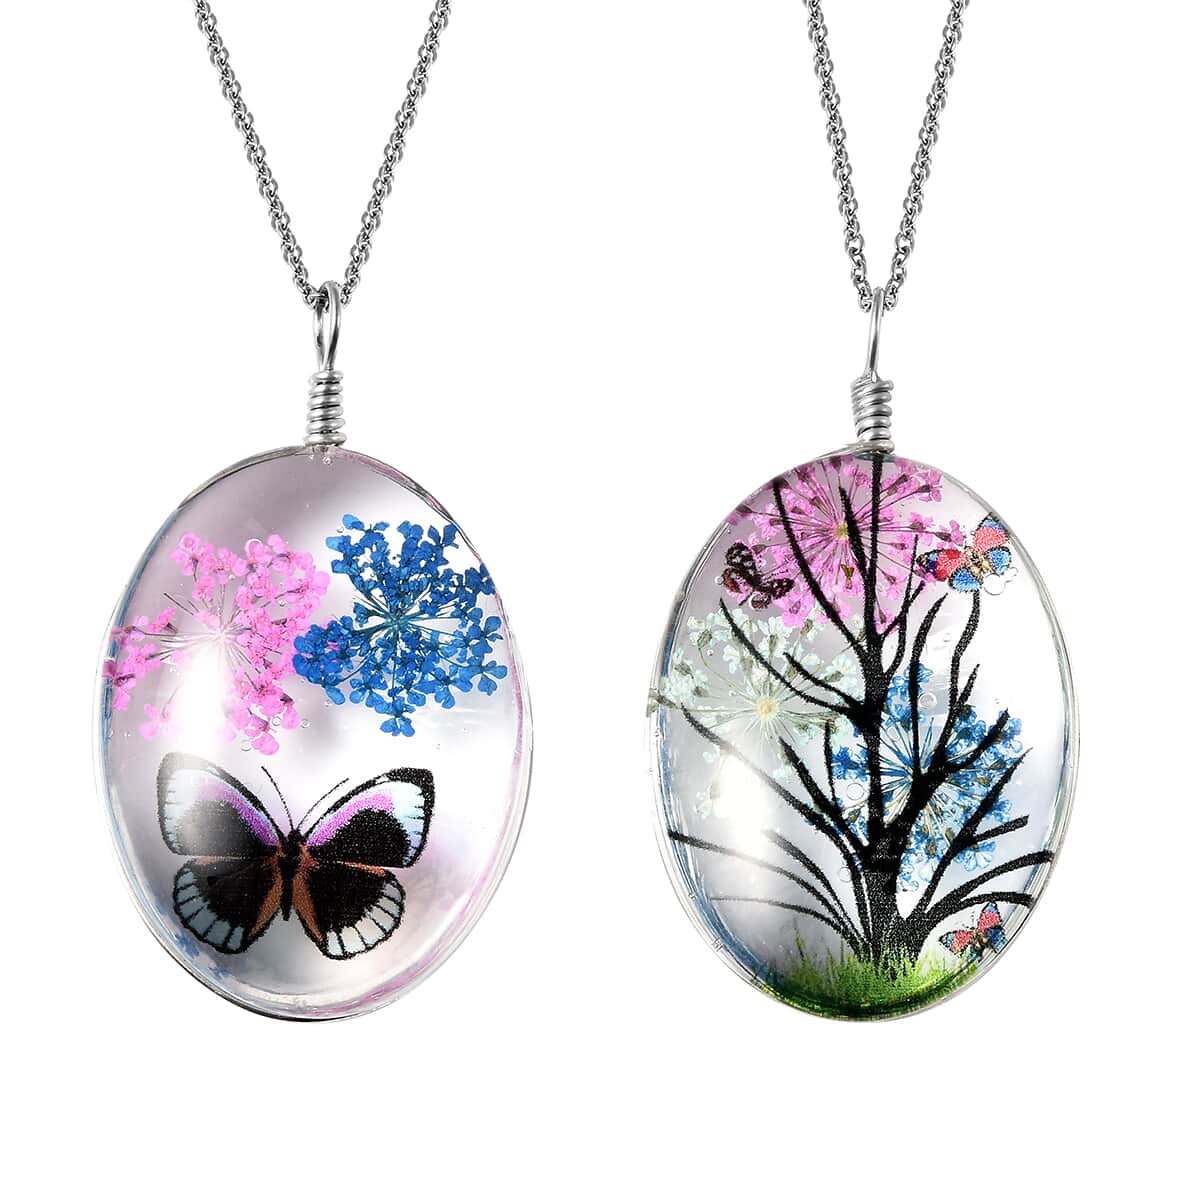 Set of 2 Pressed Flowers Pendant in Silvertone with Stainless Steel Necklace 24 Inches image number 0